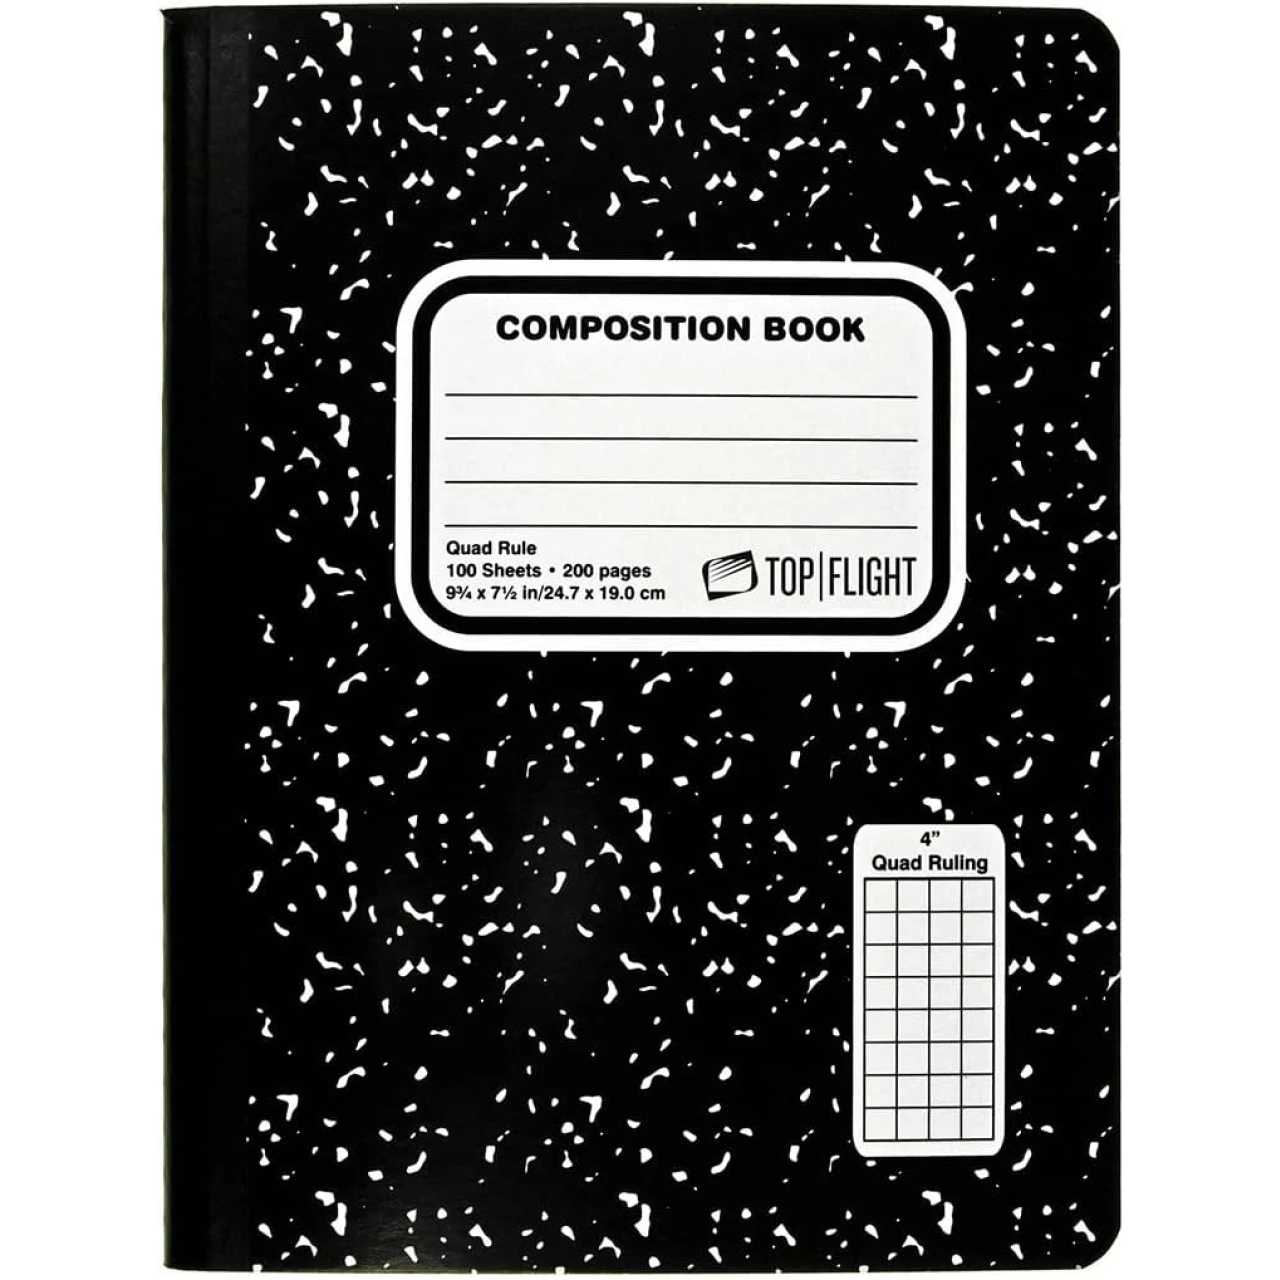 Top Flight Sewn Marble Composition Book, Black/White, Quad Rule, 4 Squares per Inch, 9.75 x 7.5 Inches, 100 Sheets